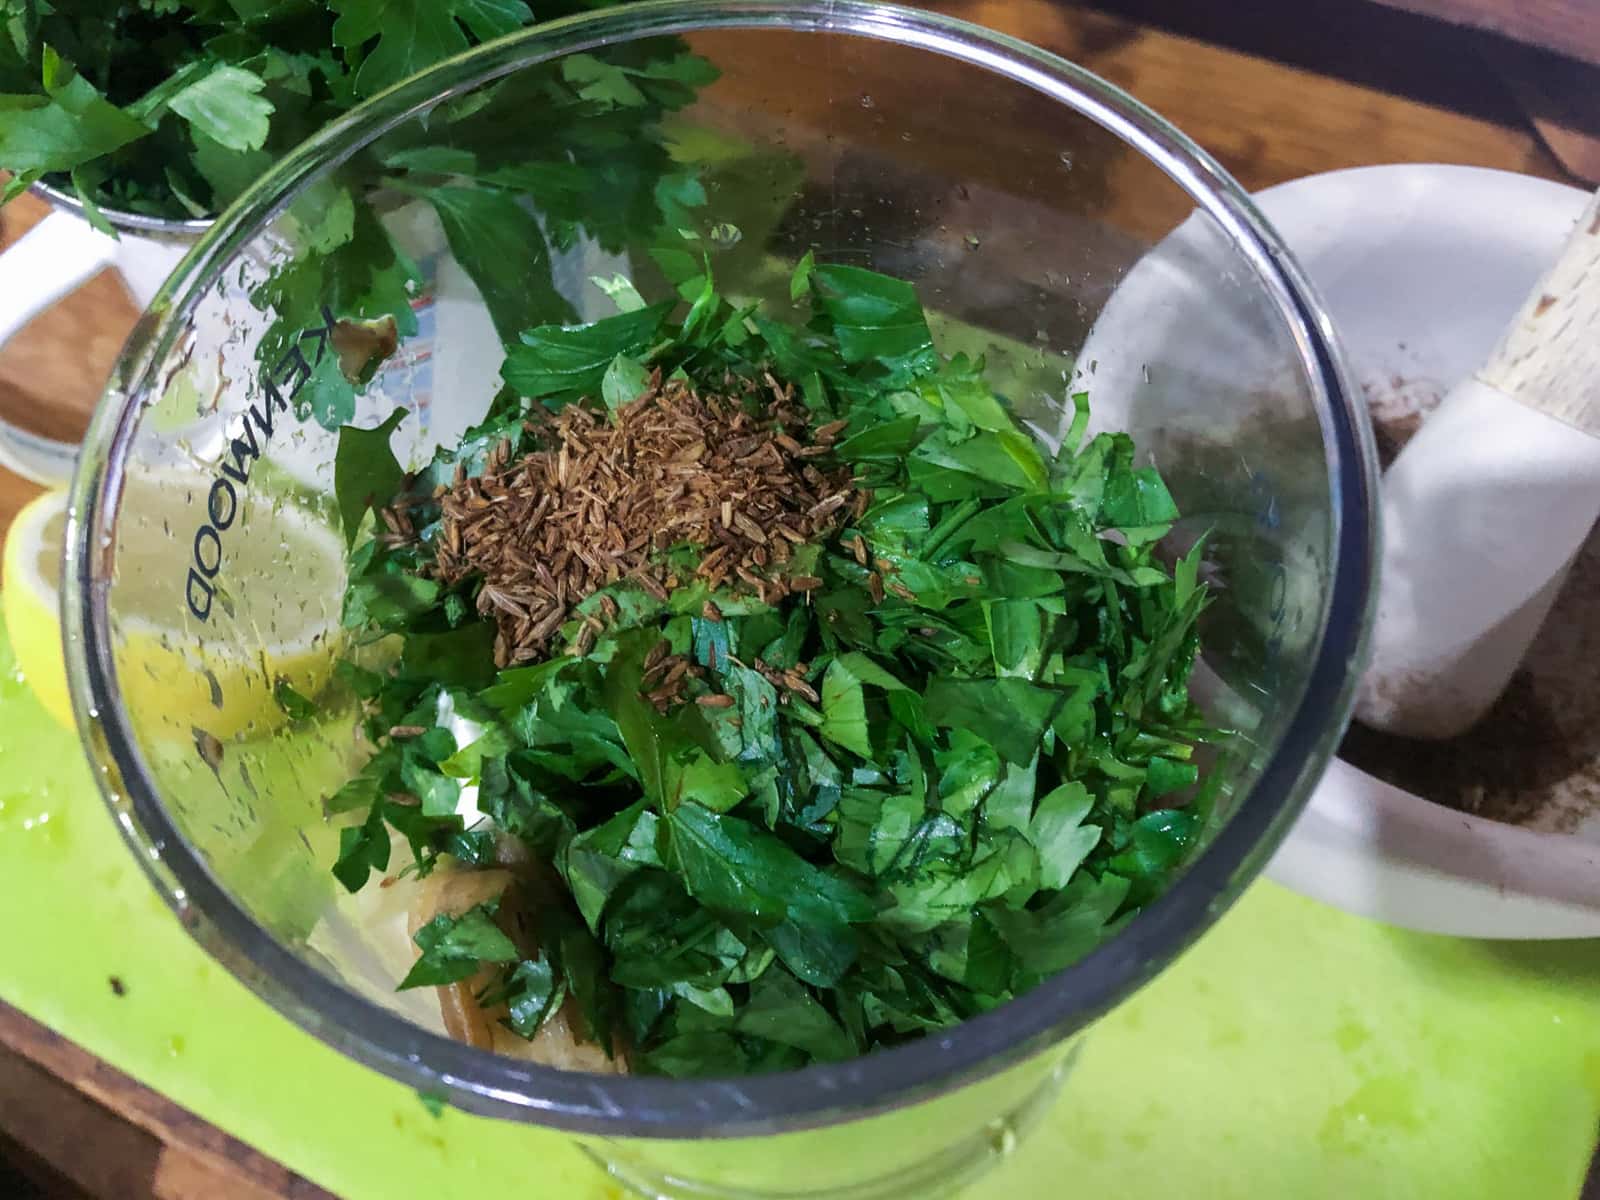 Spices, chopped parsley and cooked aubergine in a blender to make a smooth dip.